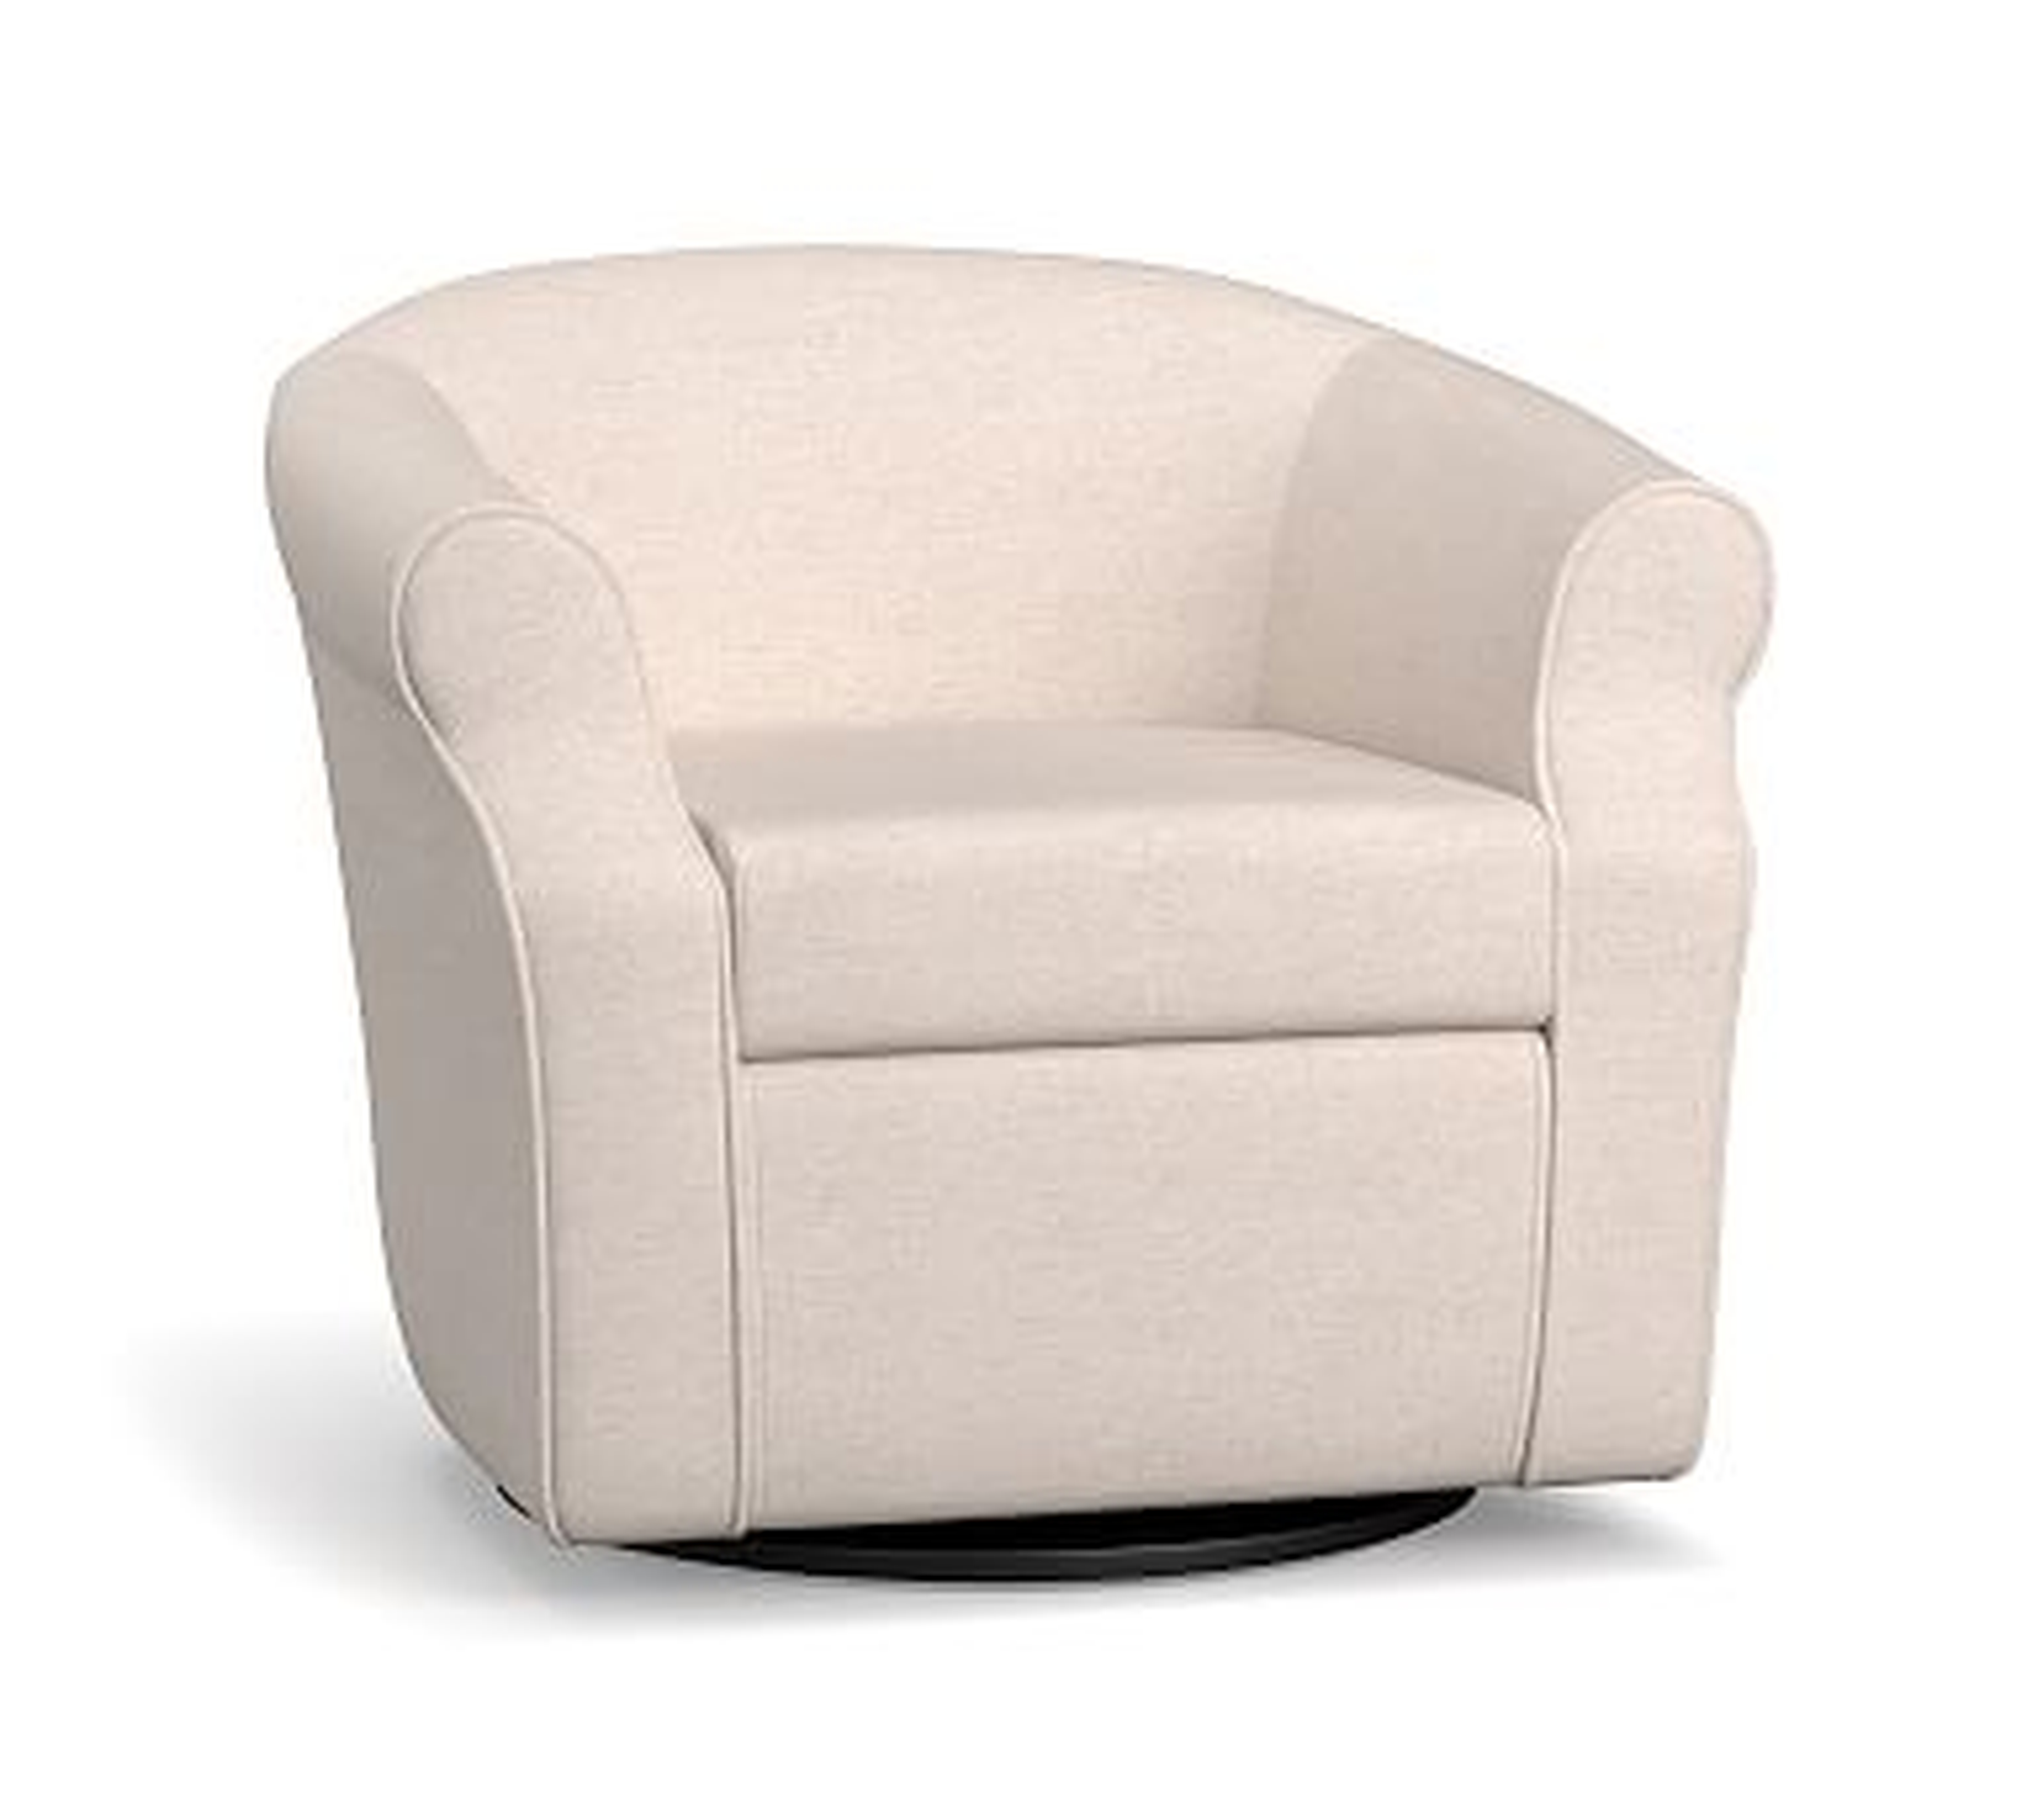 SoMa Lyndon Upholstered Swivel Armchair, Polyester Wrapped Cushions, Twill Cream - Pottery Barn